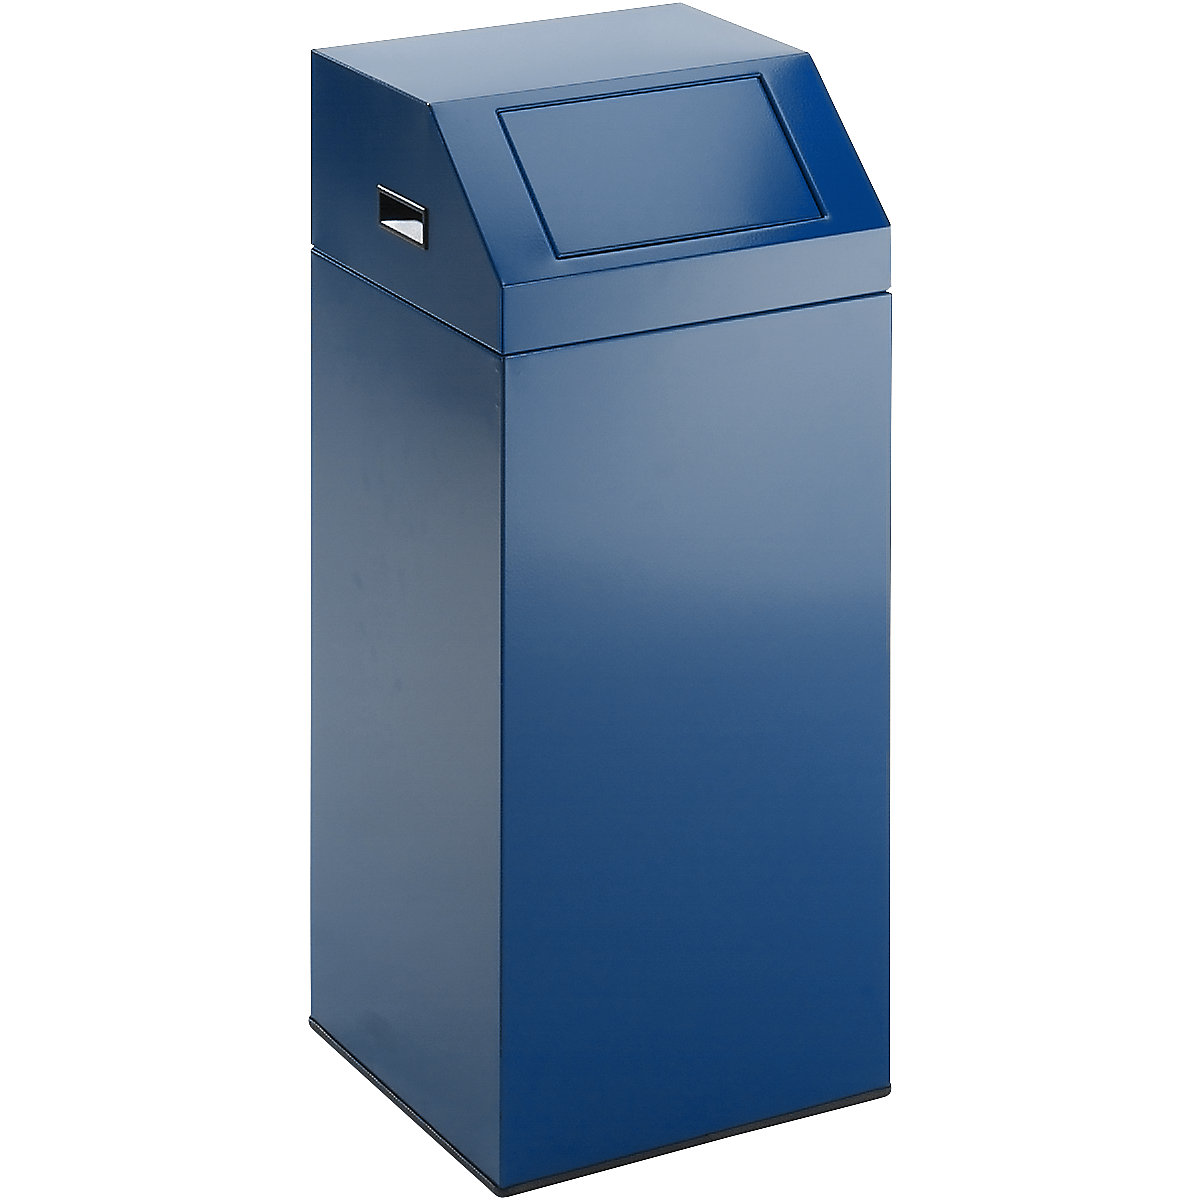 EUROKRAFTpro – Recyclable waste collector, capacity 76 l, WxHxD 380 x 890 x 380 mm, gentian blue